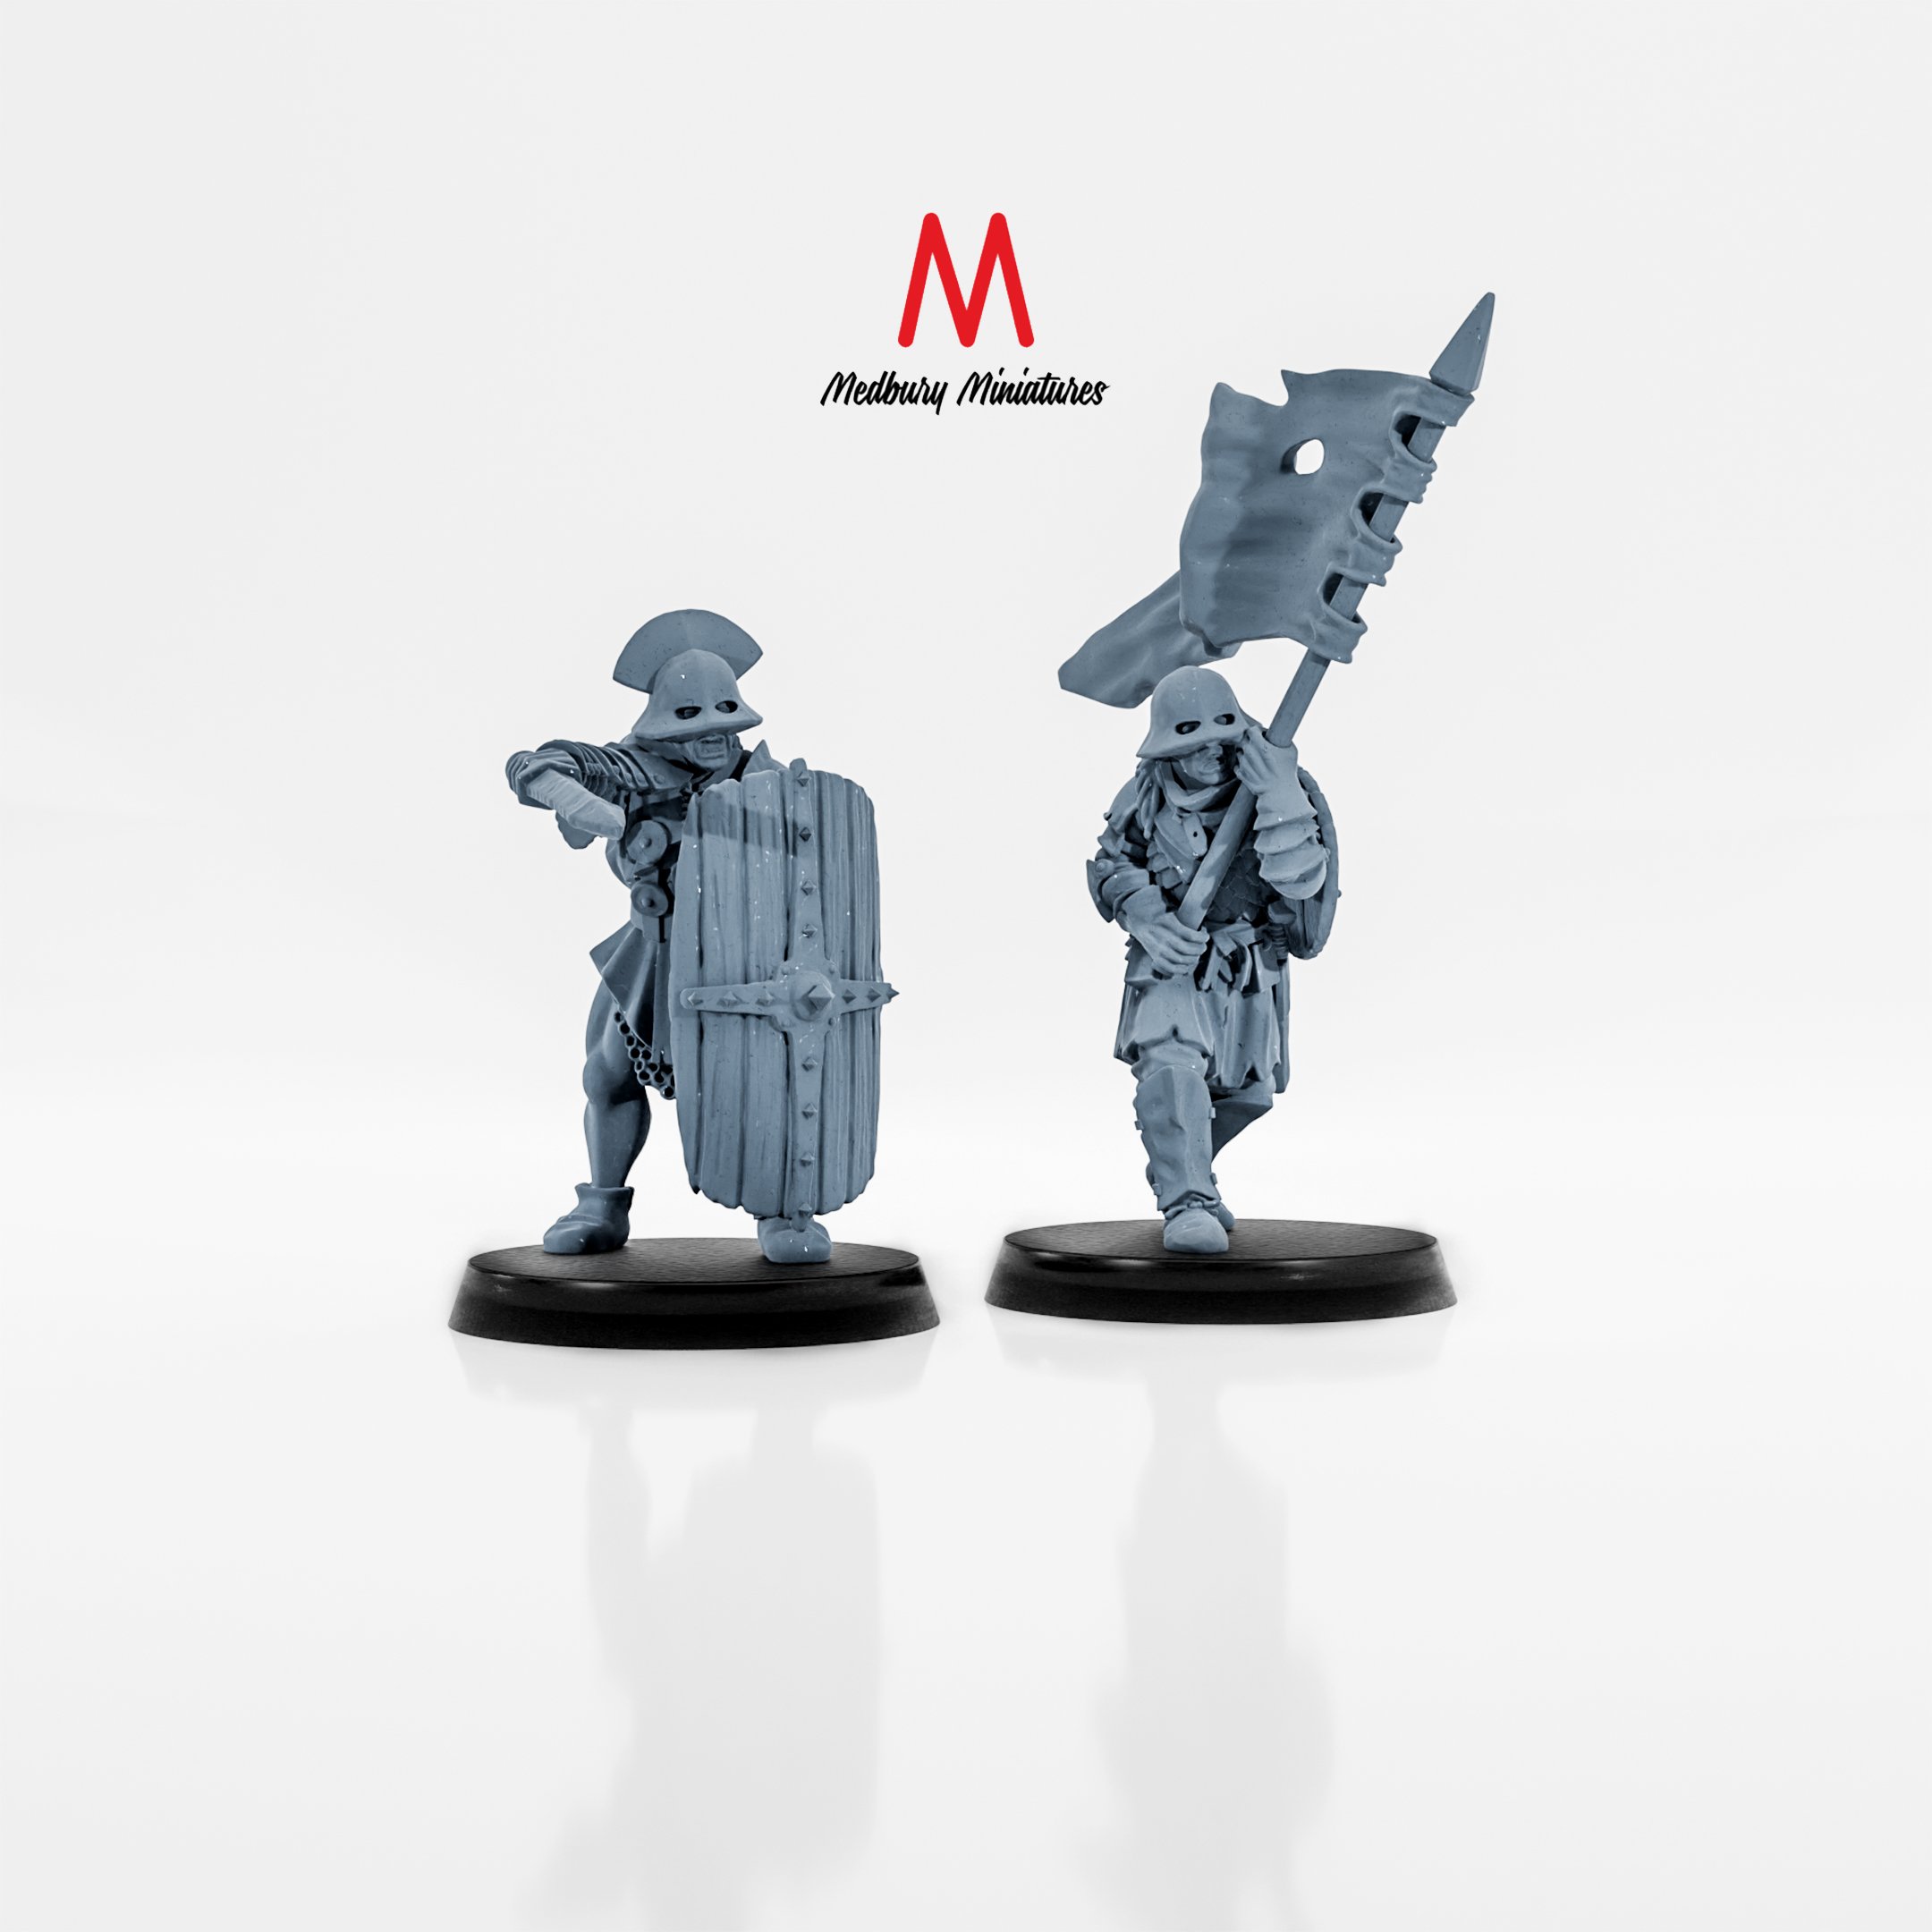 Orc Legionary Commanders fantasy skirmish wargaming miniatures designed by Medbury Miniatures 3D printed by Forgemaster Miniatures